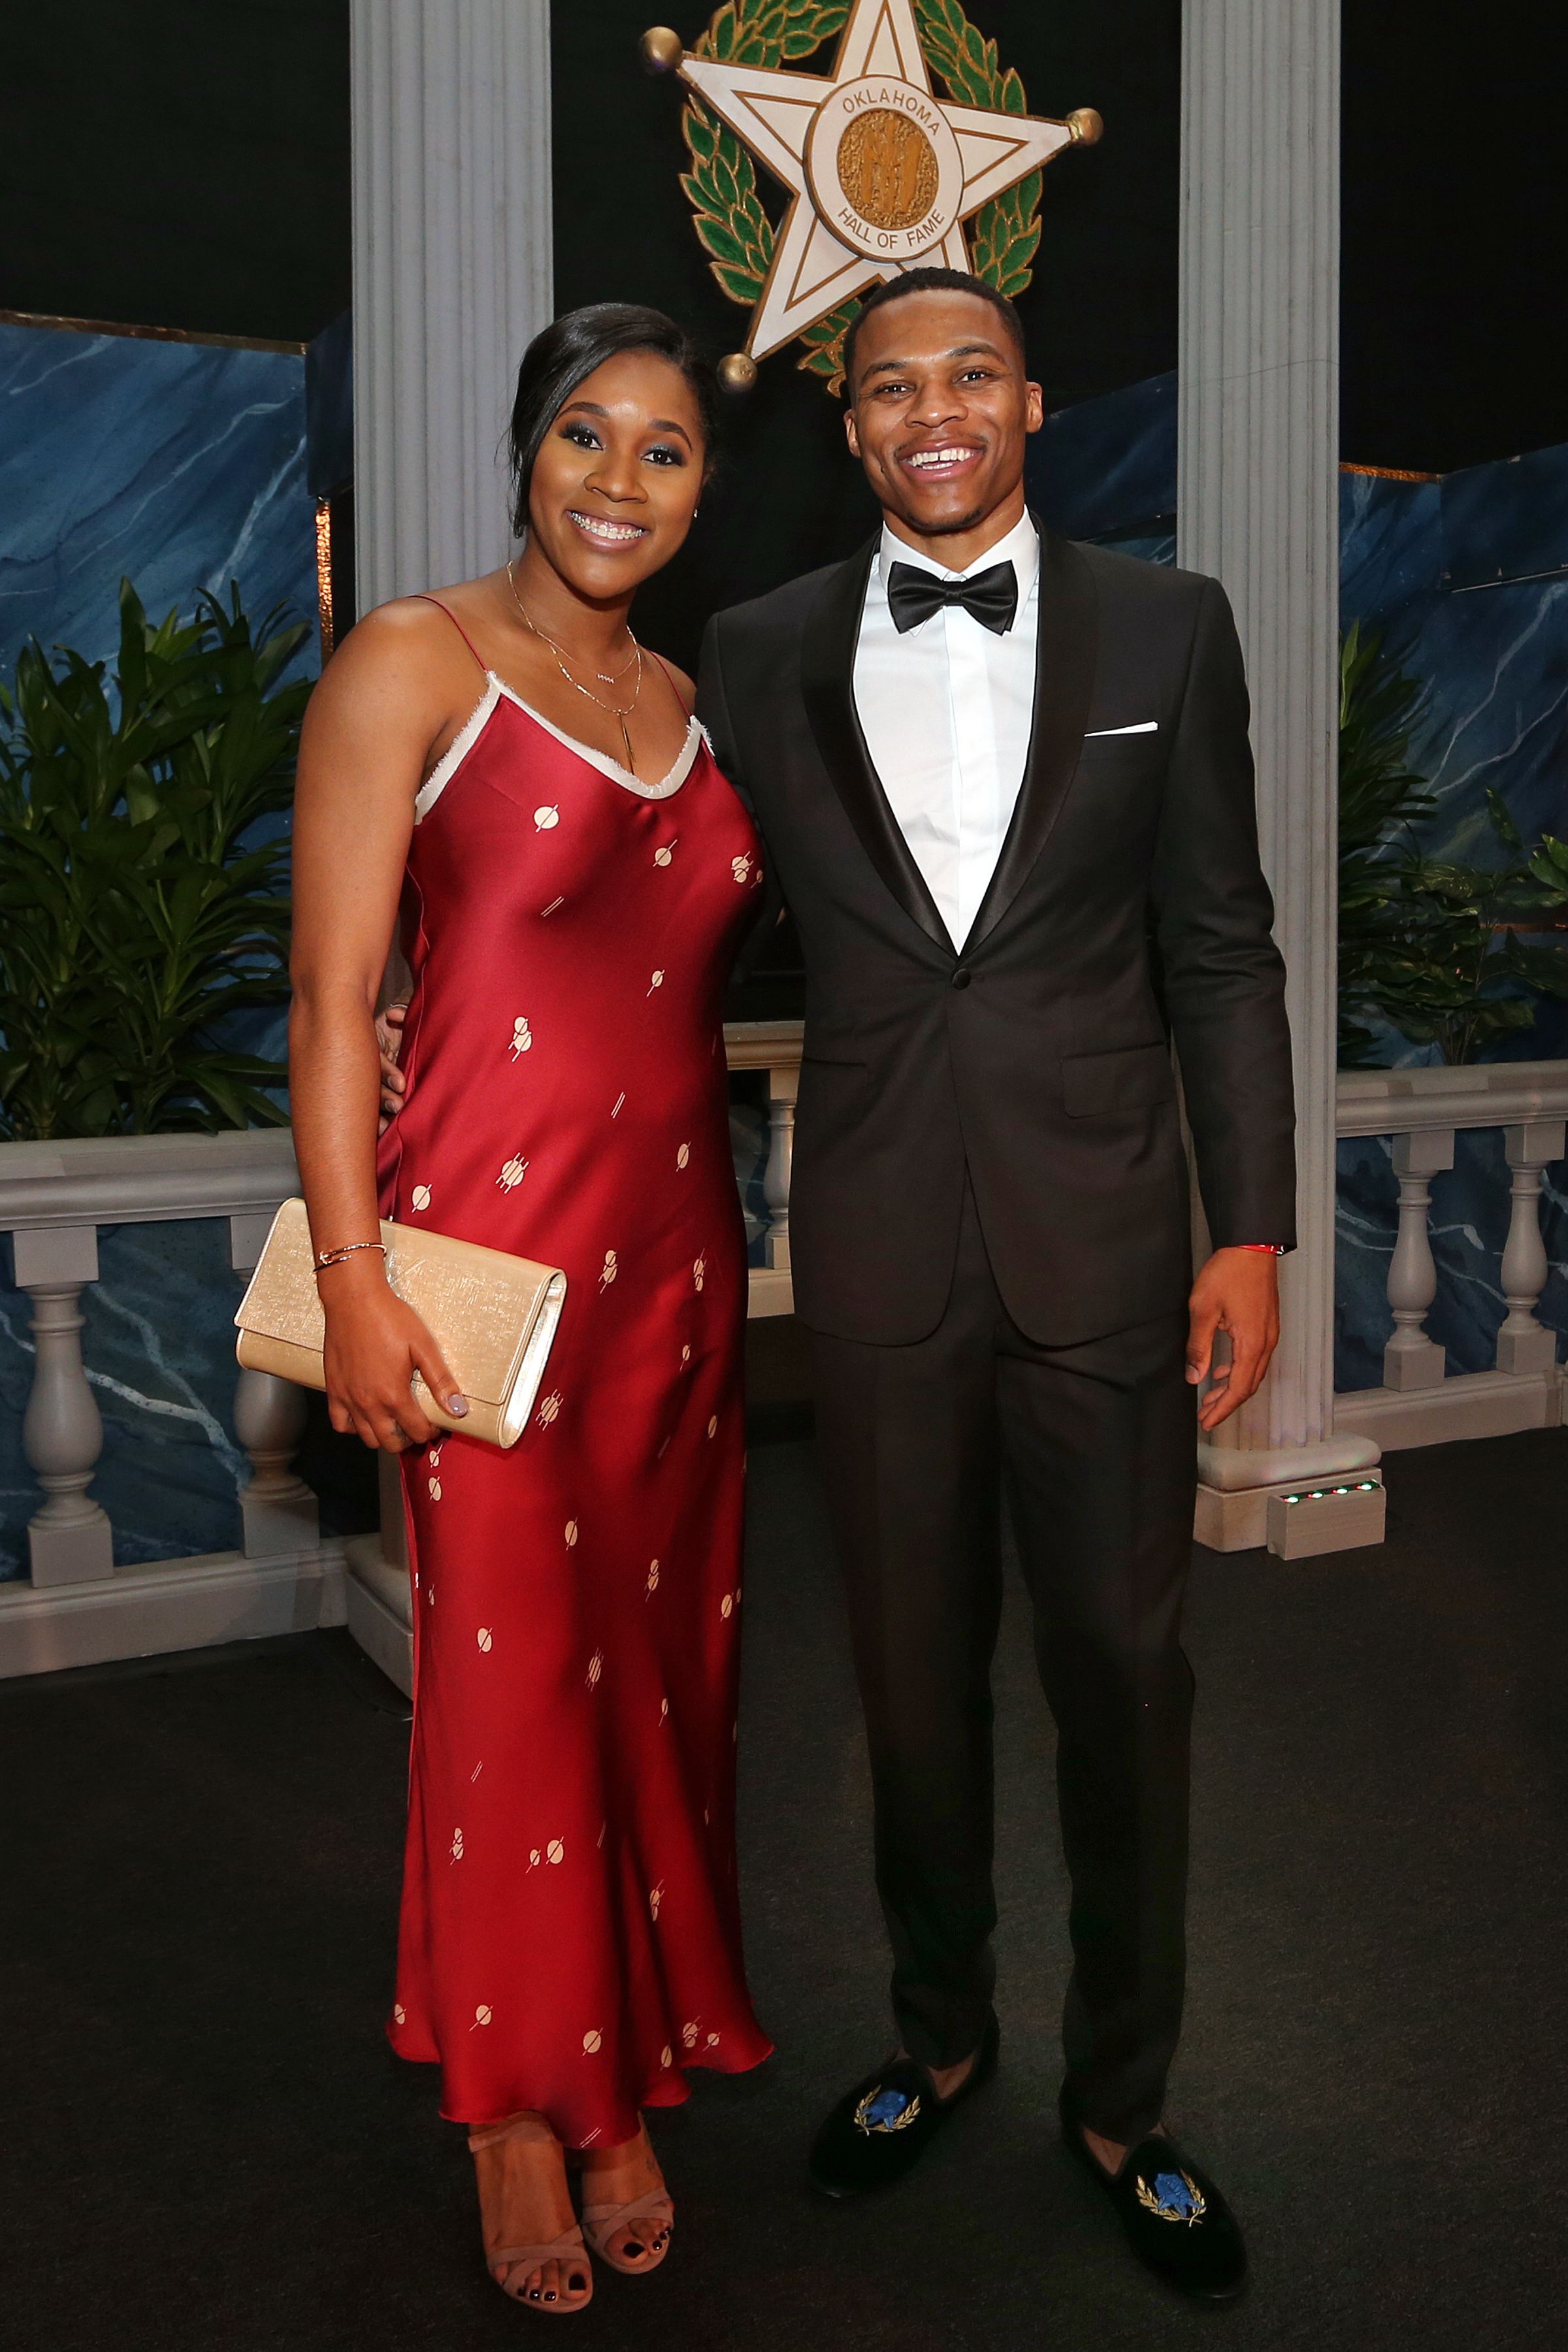 Russell Westbrook with his wife, Nina Ann-Marie Westbrook on November 17, 2016 at the Cox Convention Center in Oklahoma City, Oklahoma. | Source: Getty Images